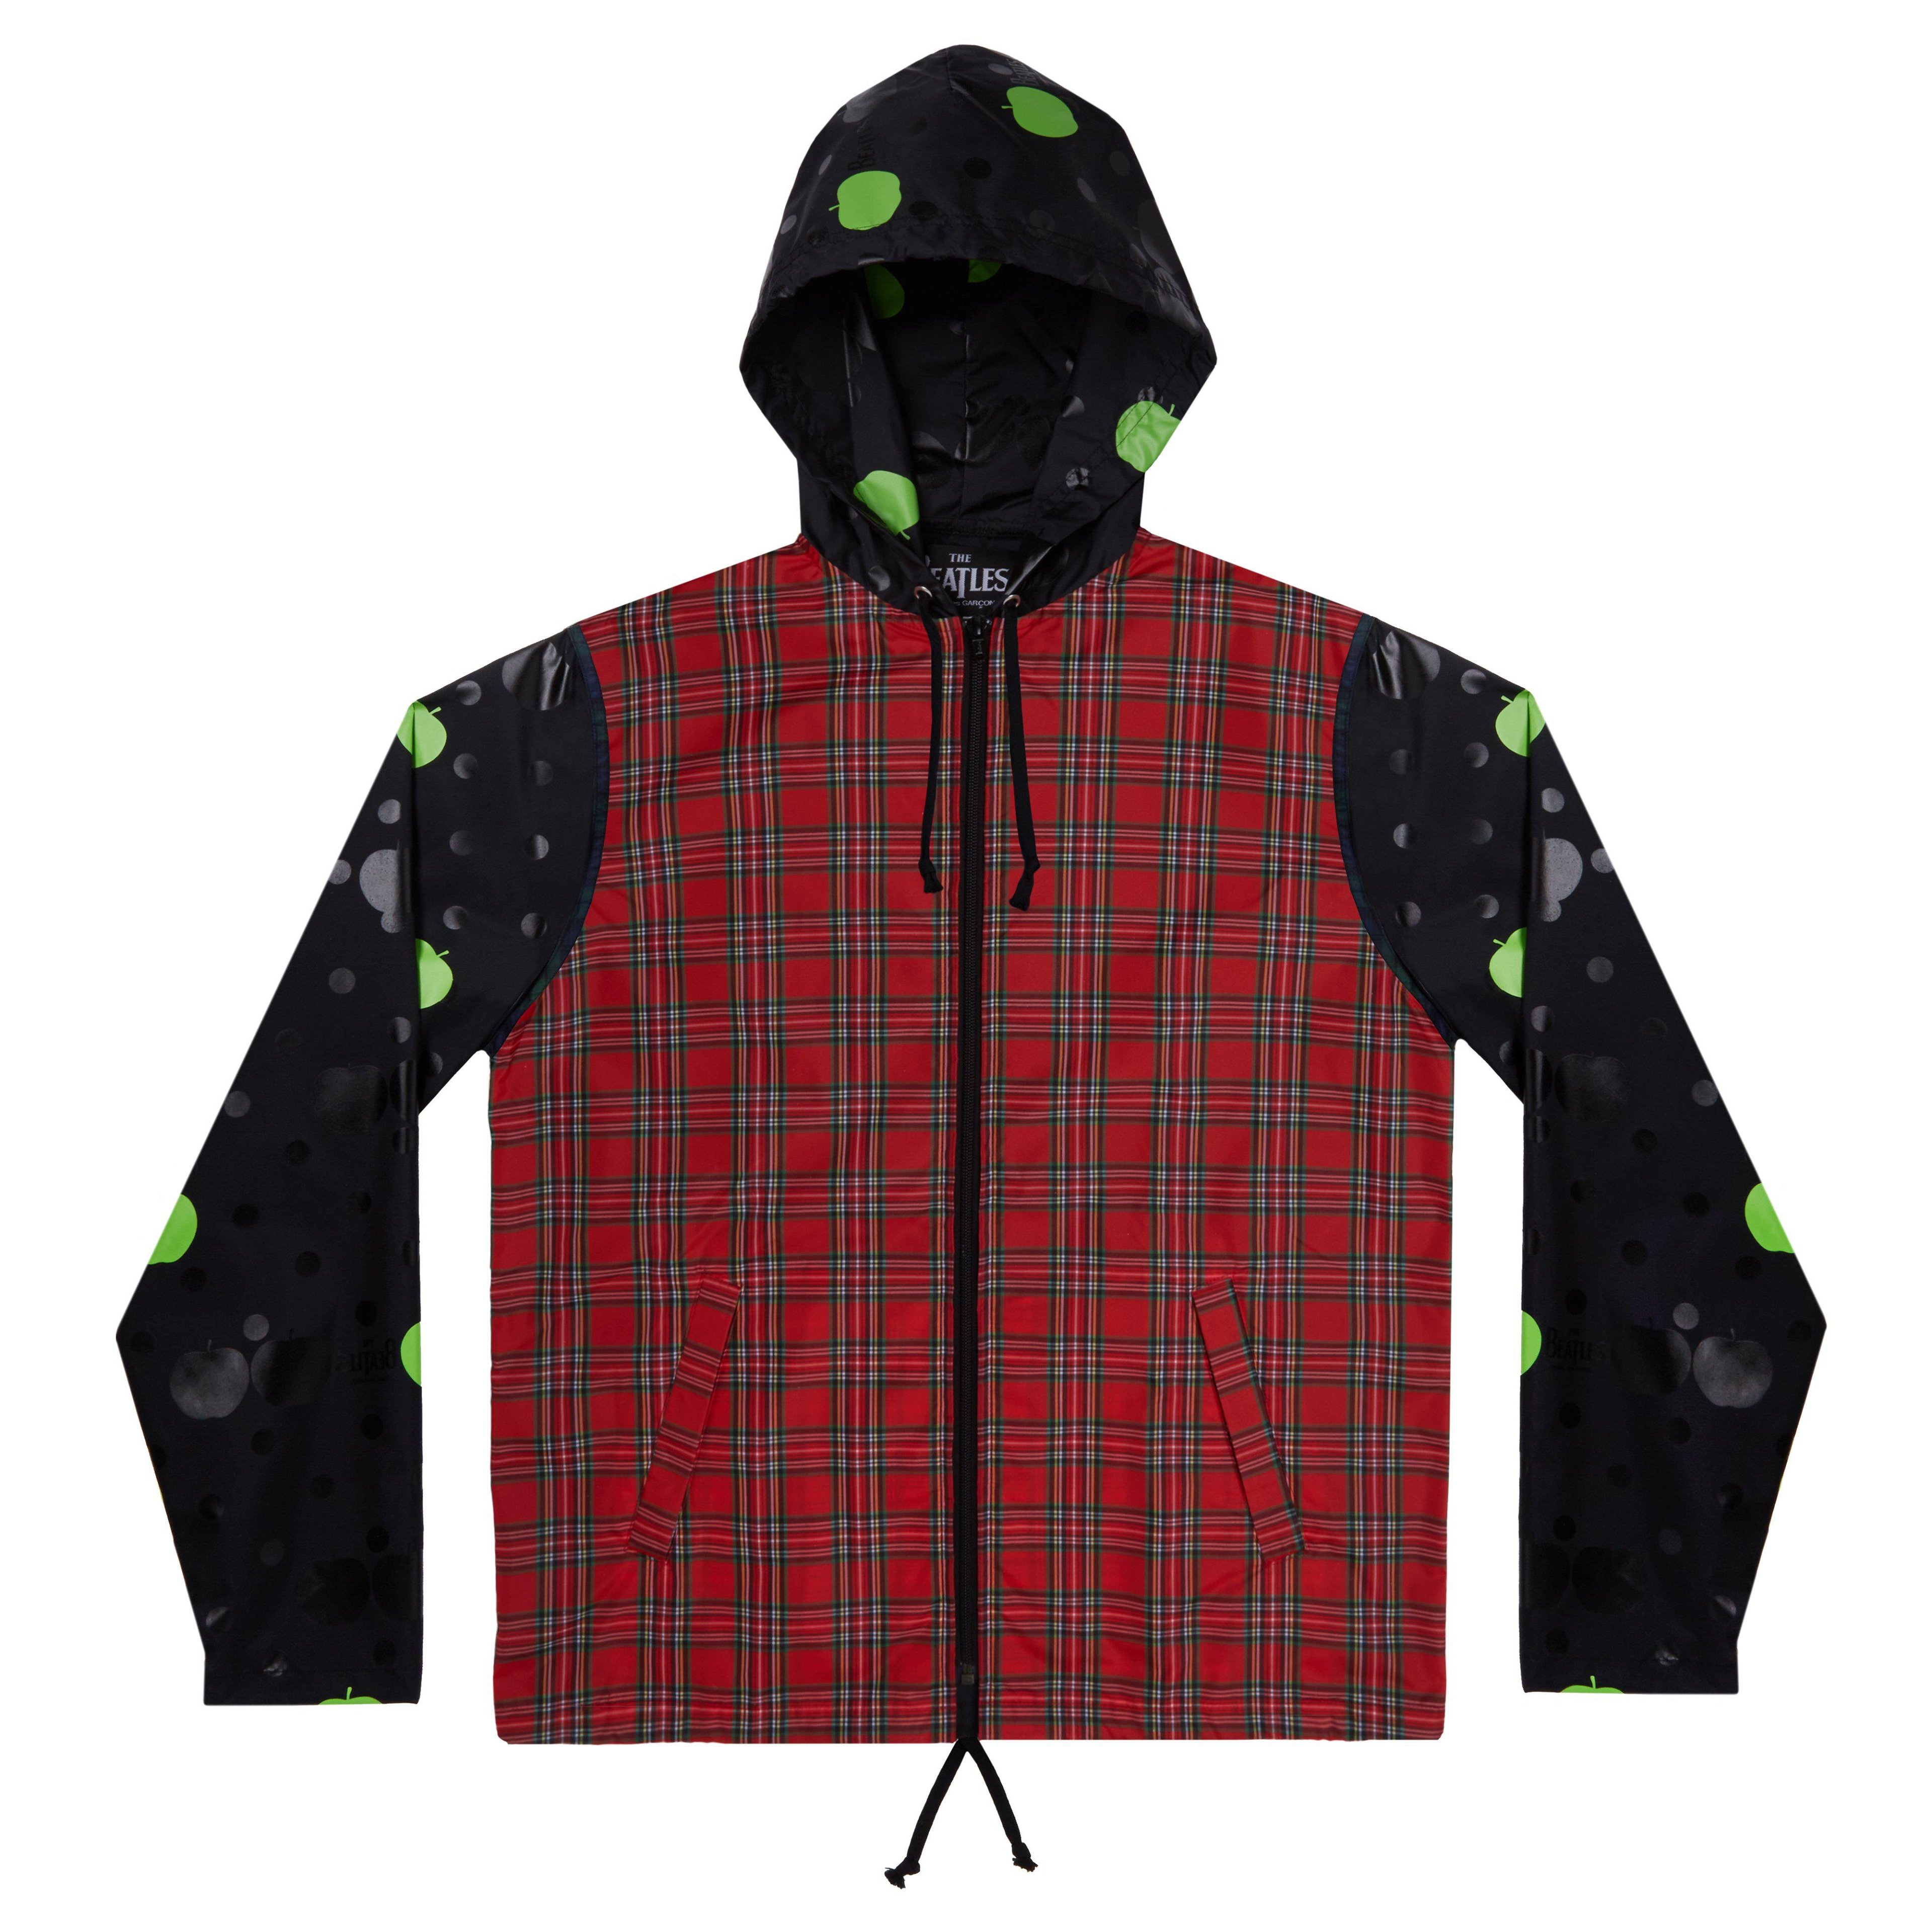 CDG Beatles - Unisex Nylon Jacket - (Red) by COMME DES GARCONS